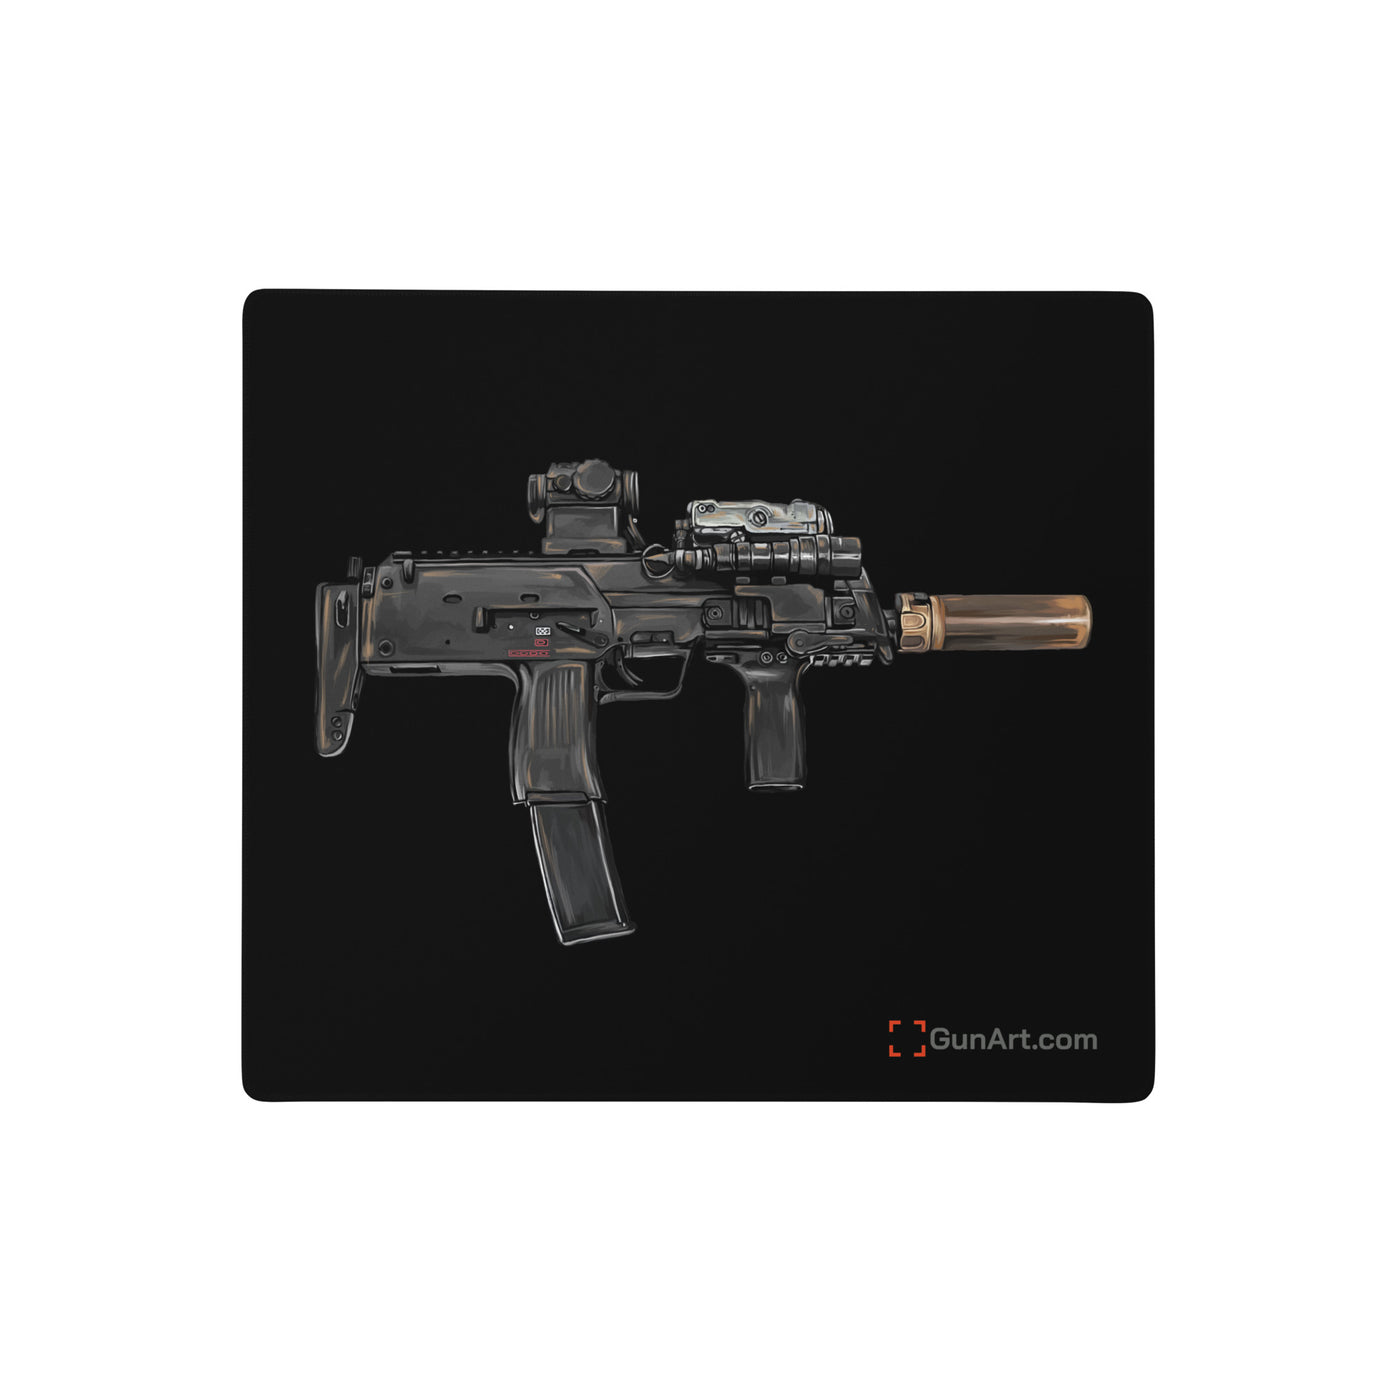 German 4.6x30mm Sub Machine Gun Gaming Mouse Pad - Just The Piece - Black Background